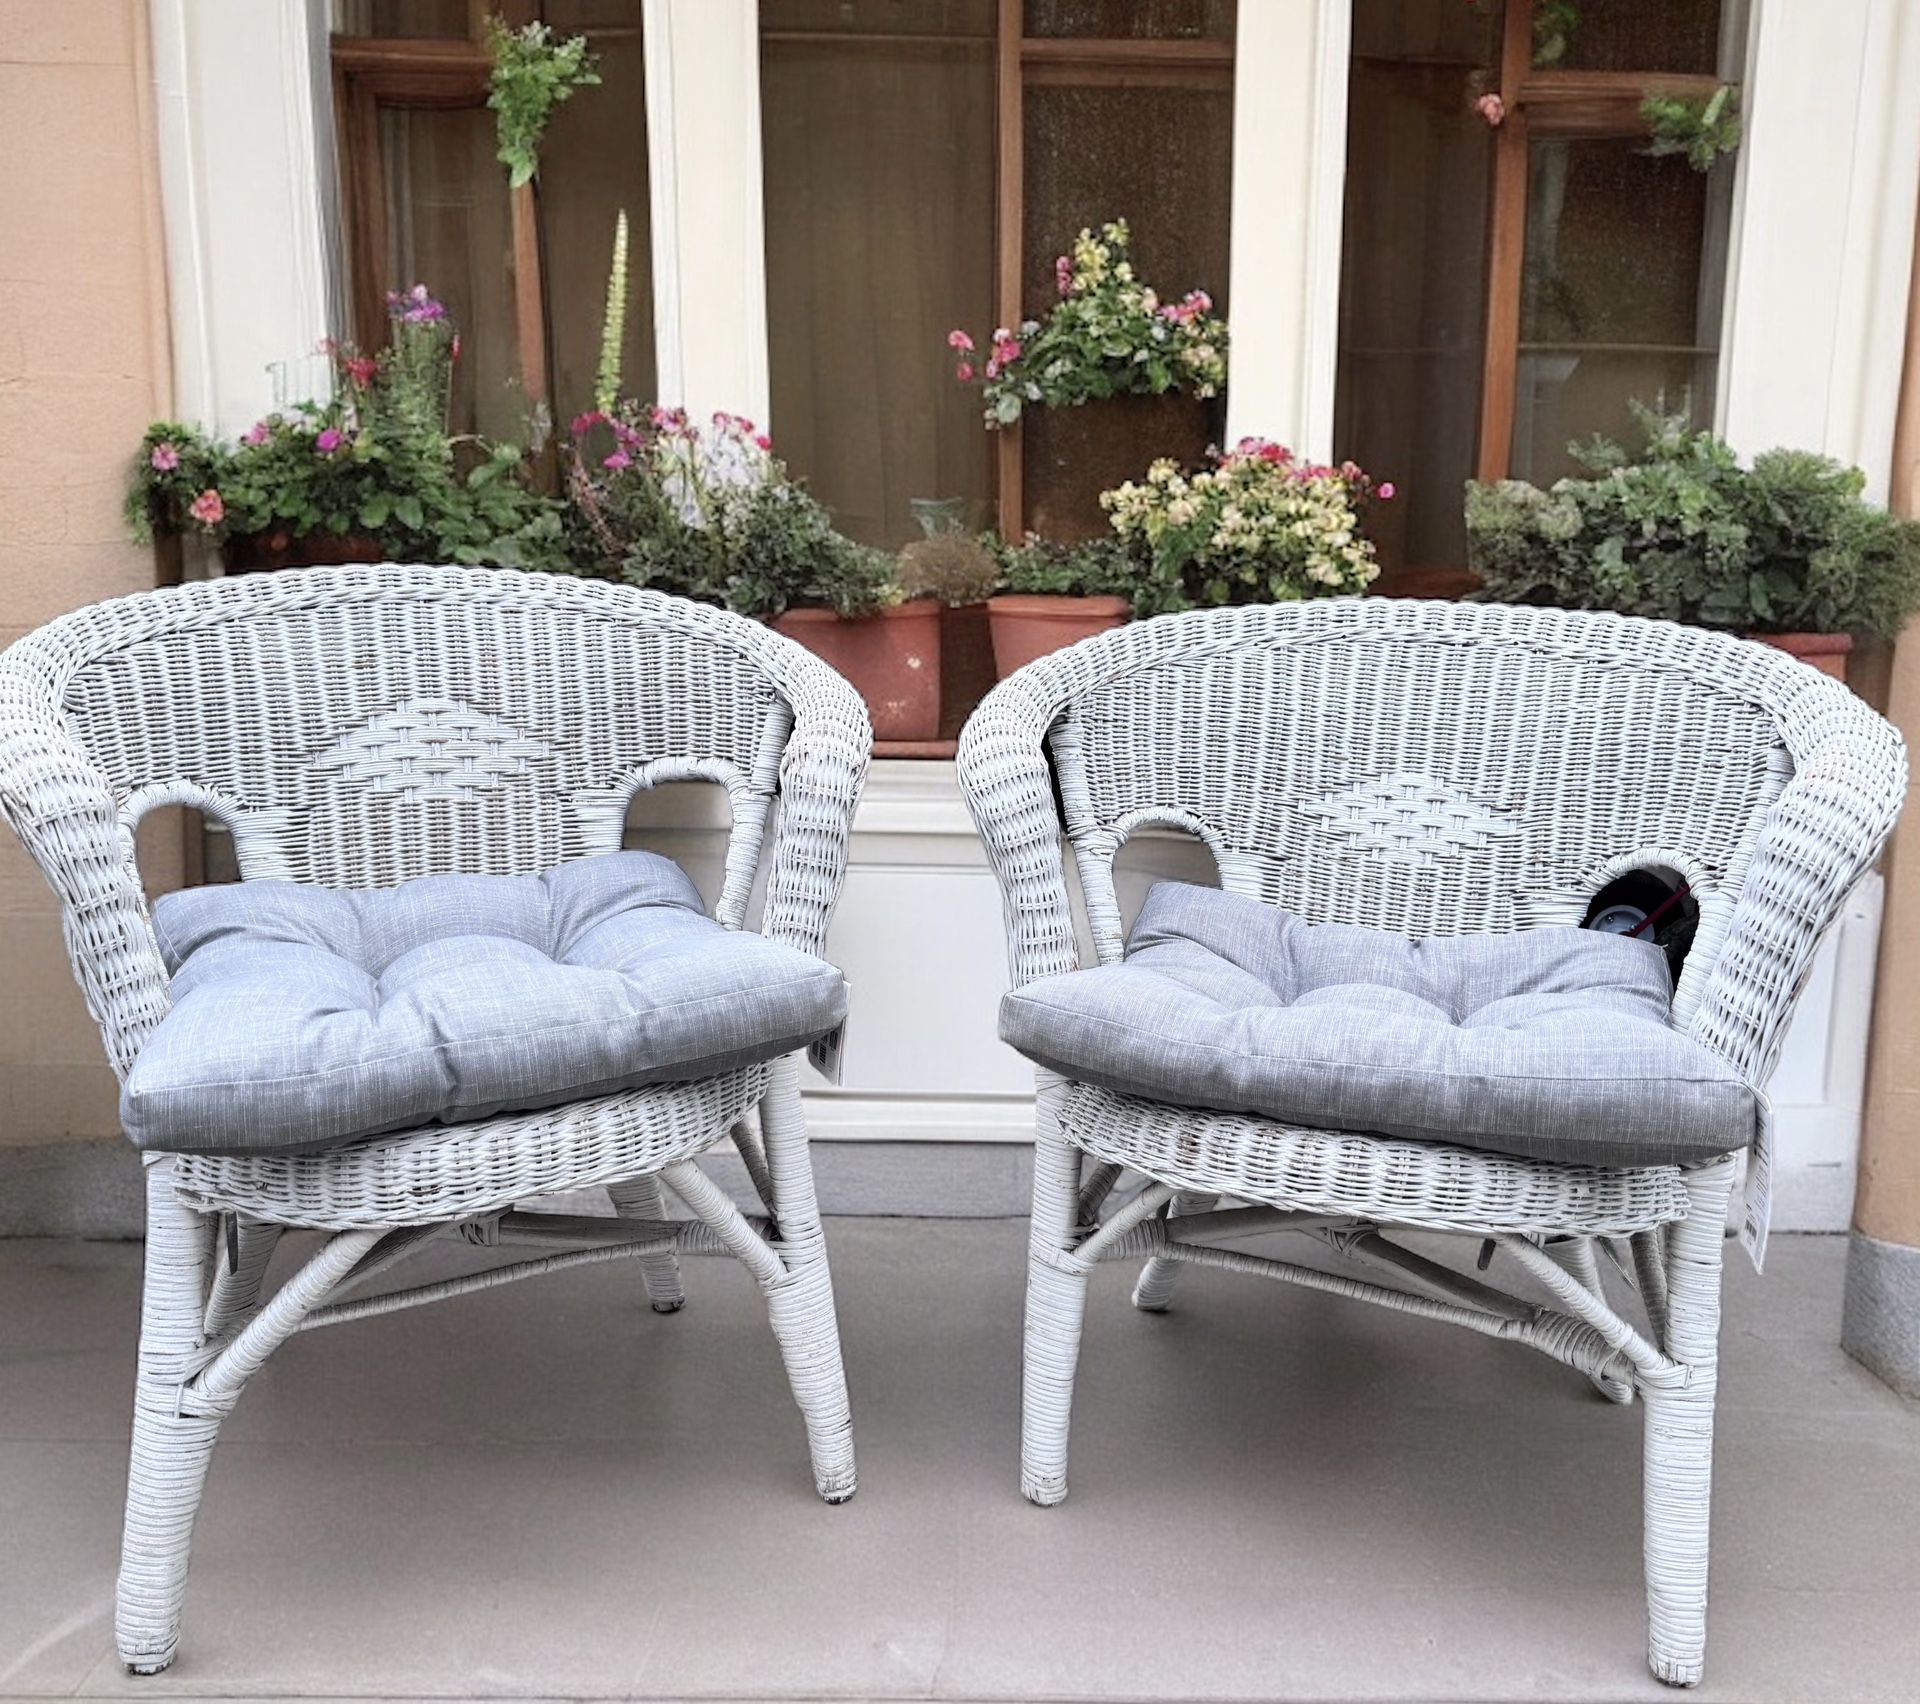 Antique White Wicker Chairs With New Cushions 